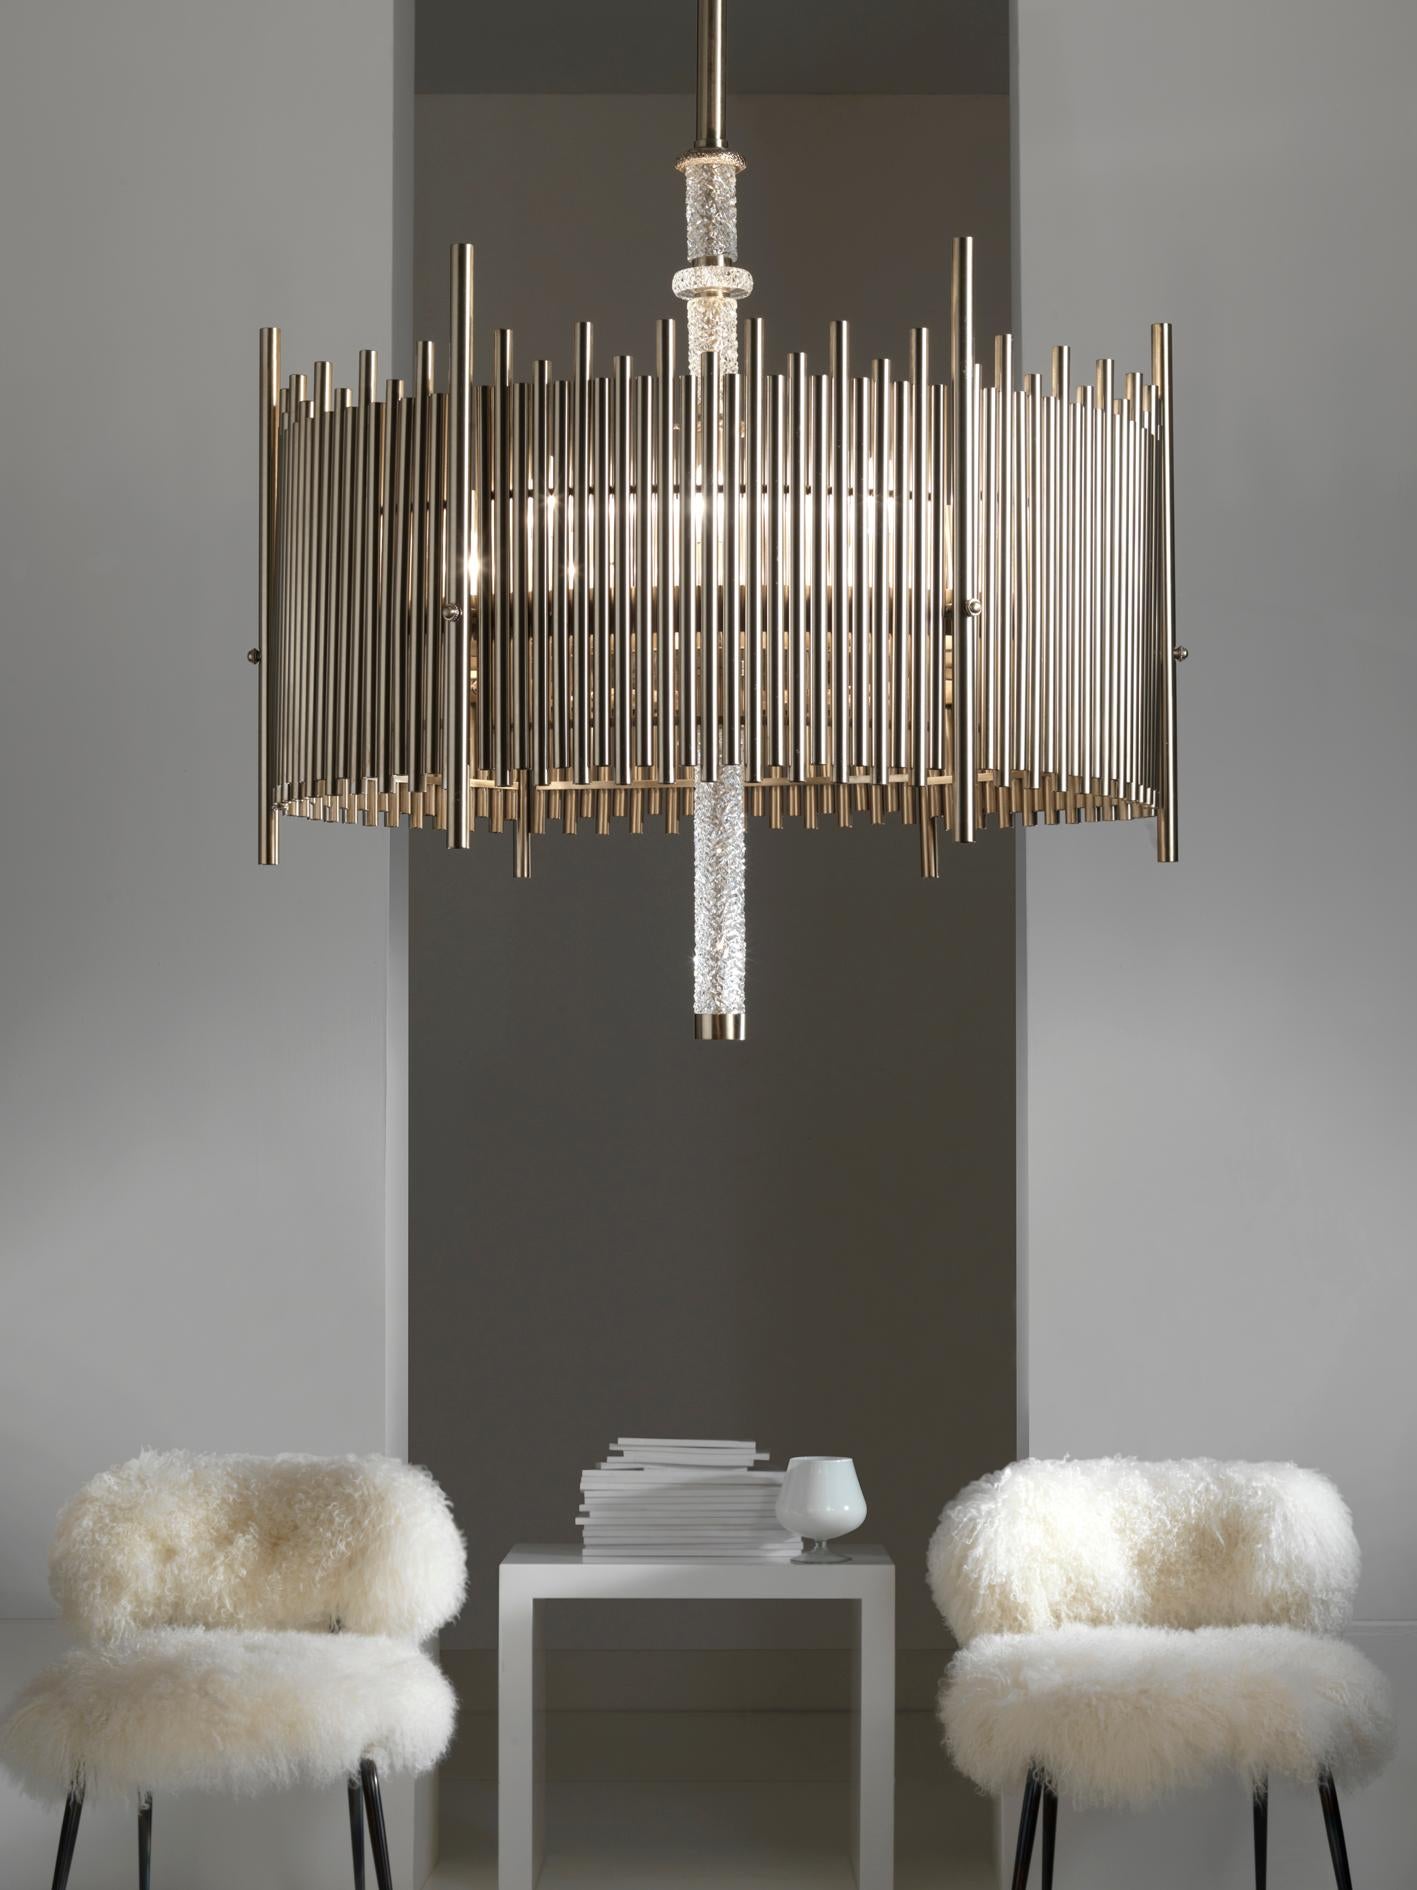 Chandelier with hand worked brass castings in brushed nickel finish and hand faceted crystal details.
With 12 lights.